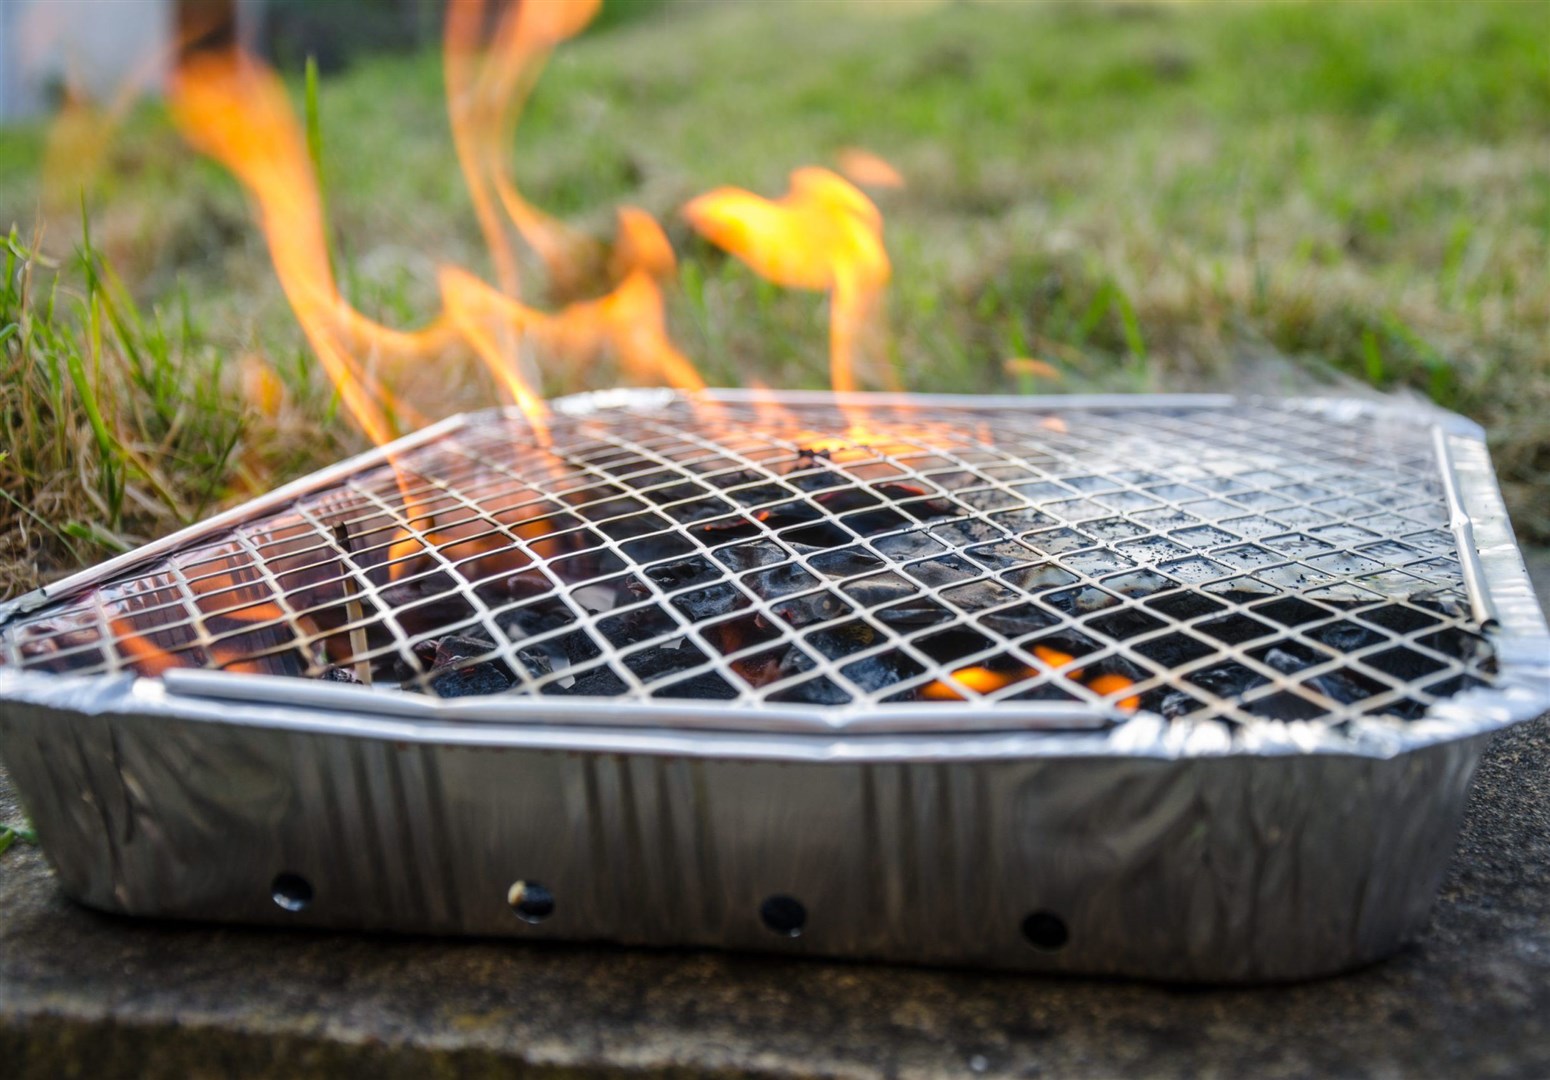 Disposable barbecues in the Great Outdoors could become a thing of the past in the Cairngorms National Park depending on what path is followed.